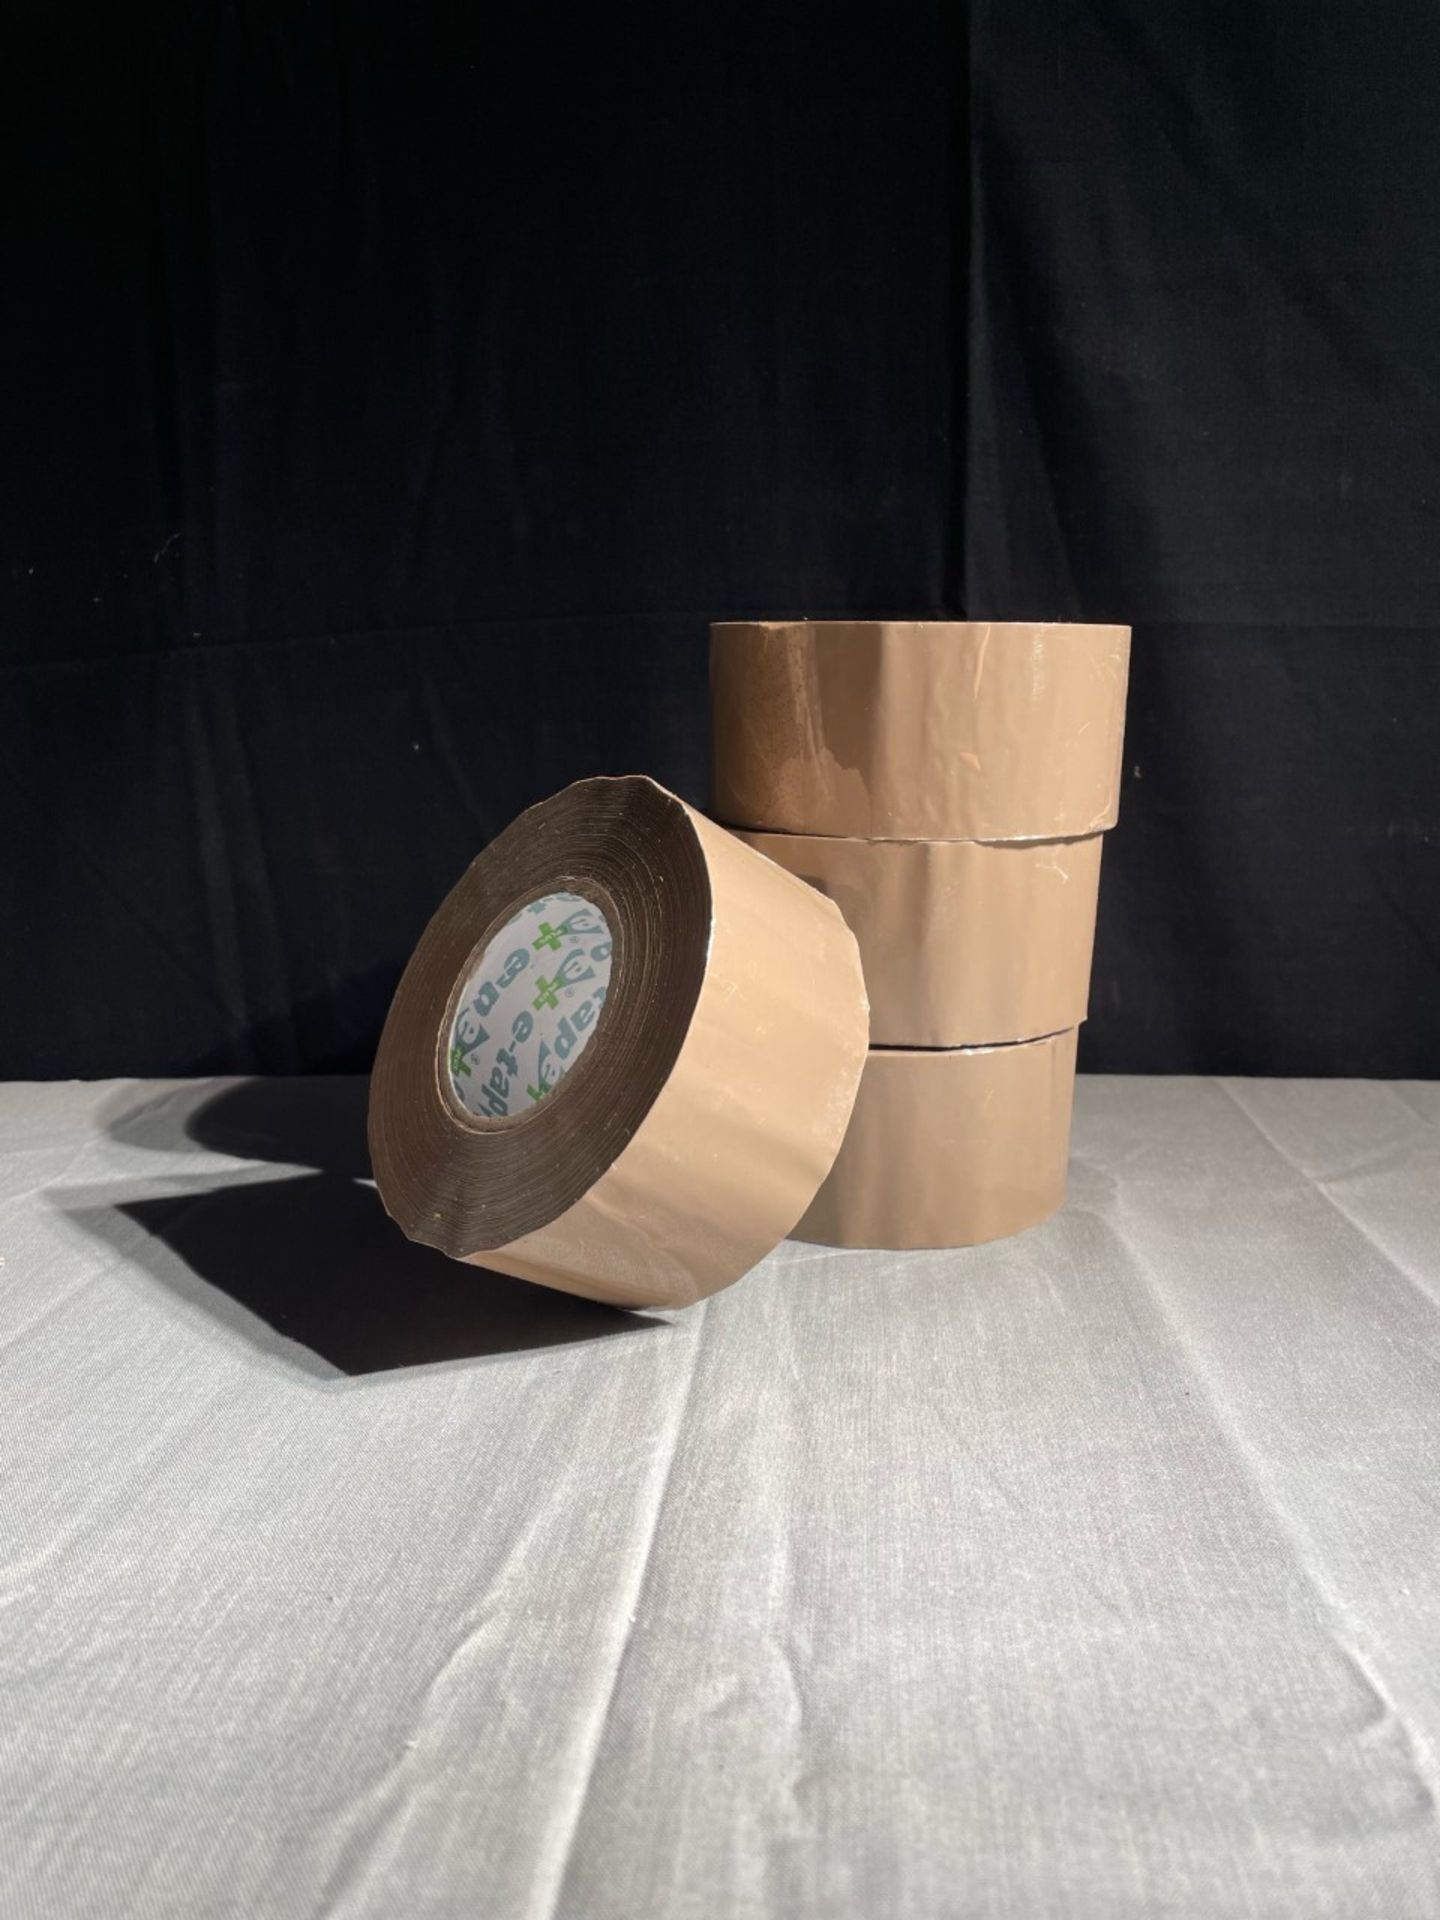 4x new rolls of brown parcel tape.